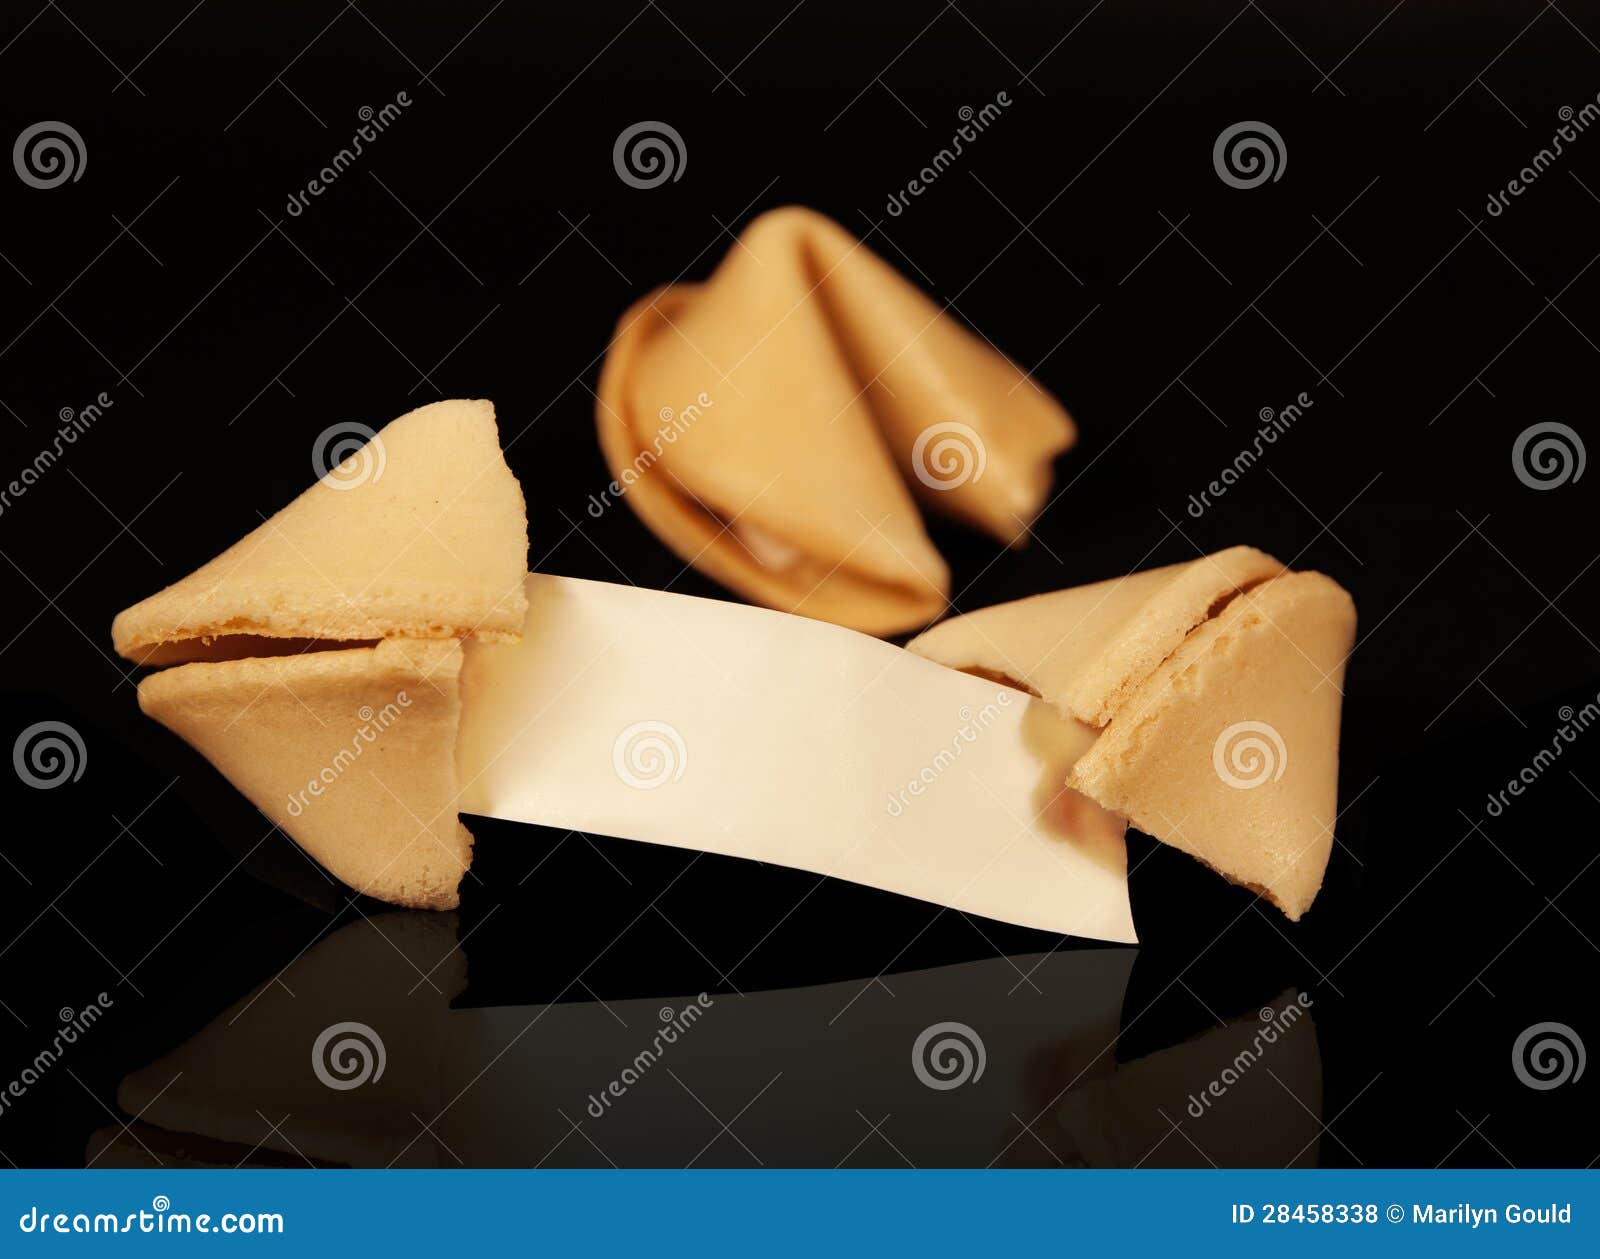 fortune cookies blank fortune